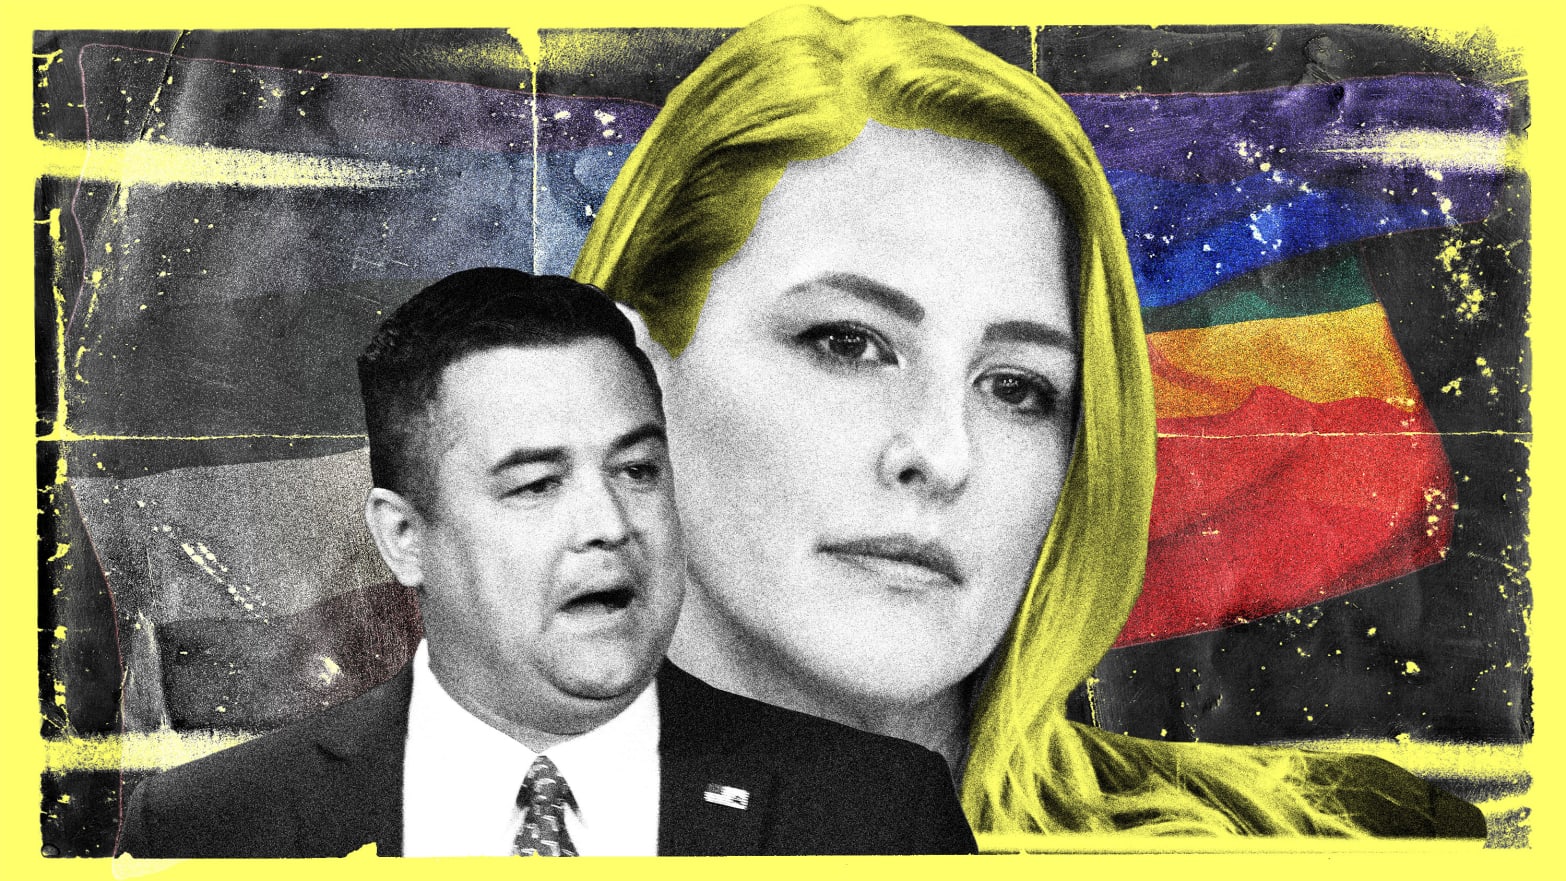 Bridget Ziegler’s Gay Ex-Friends Are Sad About Who She’s Become (thedailybeast.com)